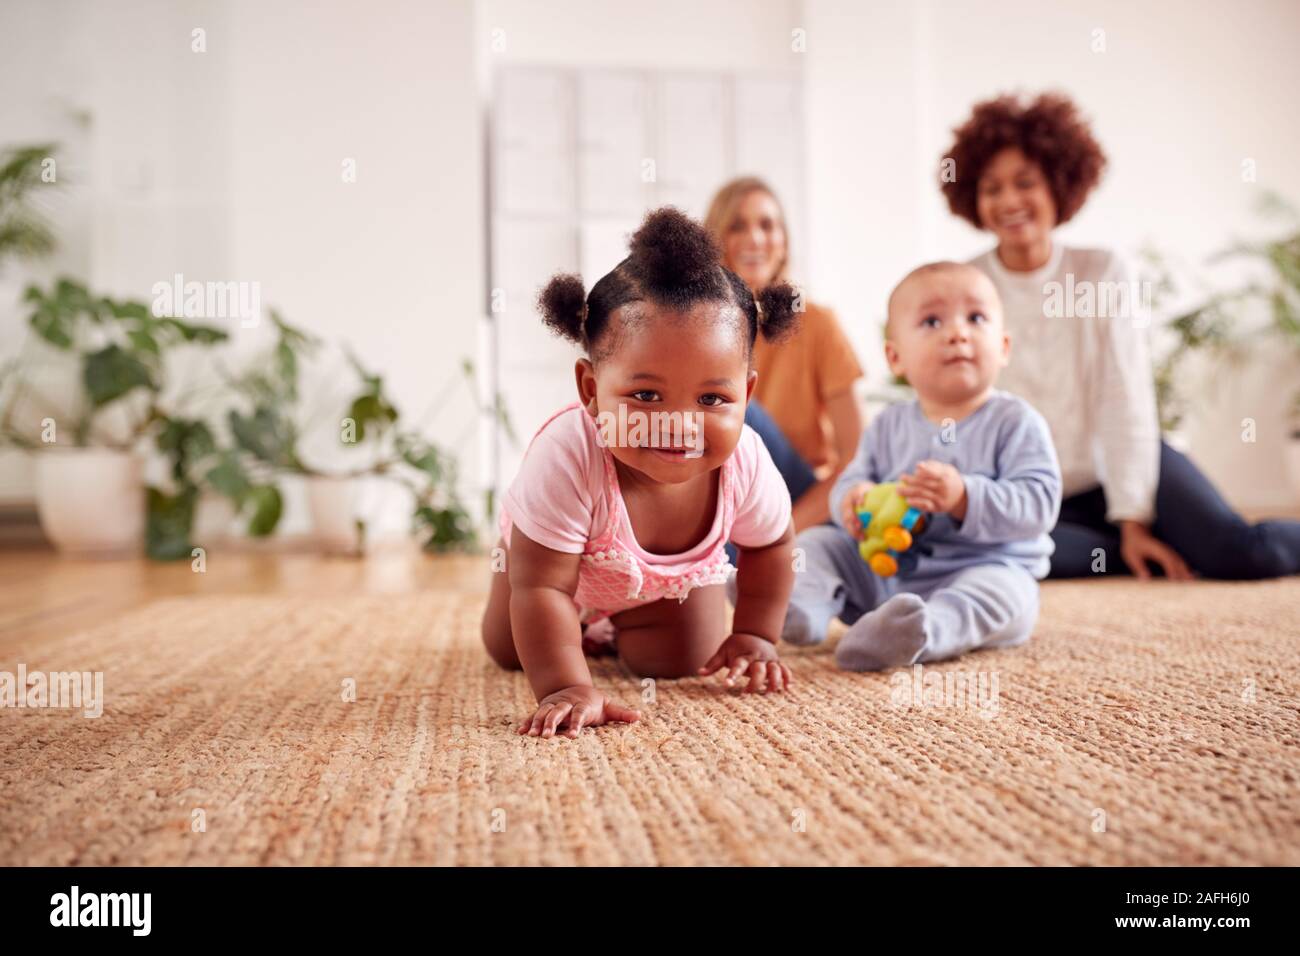 Two Mothers Meeting For Play Date With Babies At Home In Loft Apartment Stock Photo